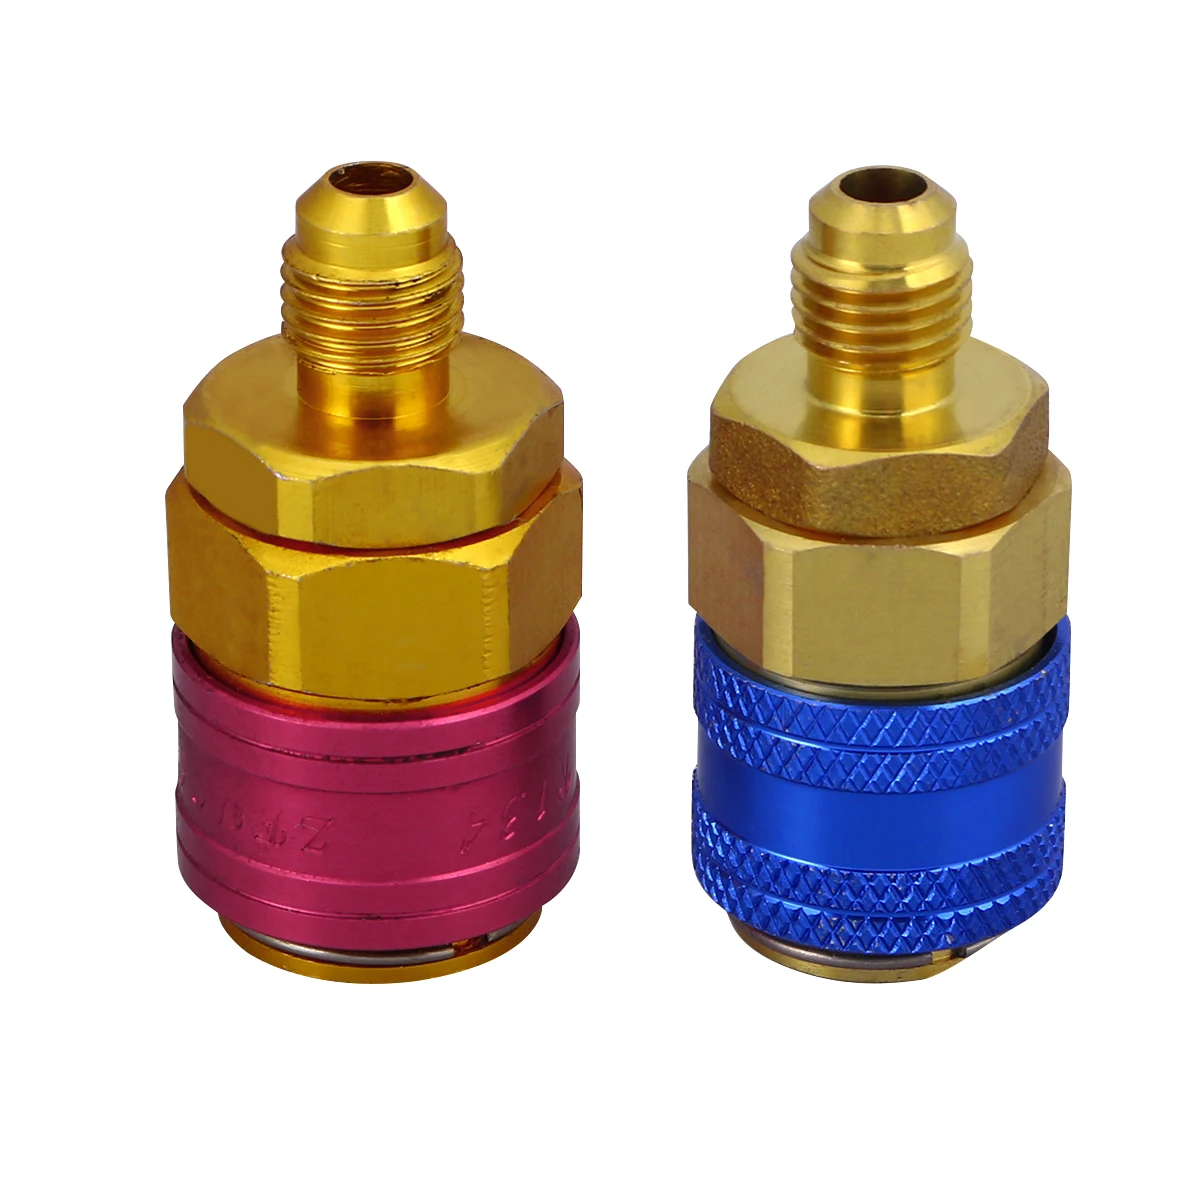 

1 Pair Freon R134A Auto Car Quick Coupler Connector Brass Adapter Air Conditioning Refrigerant Adjustable AC Manifold Gauge A20